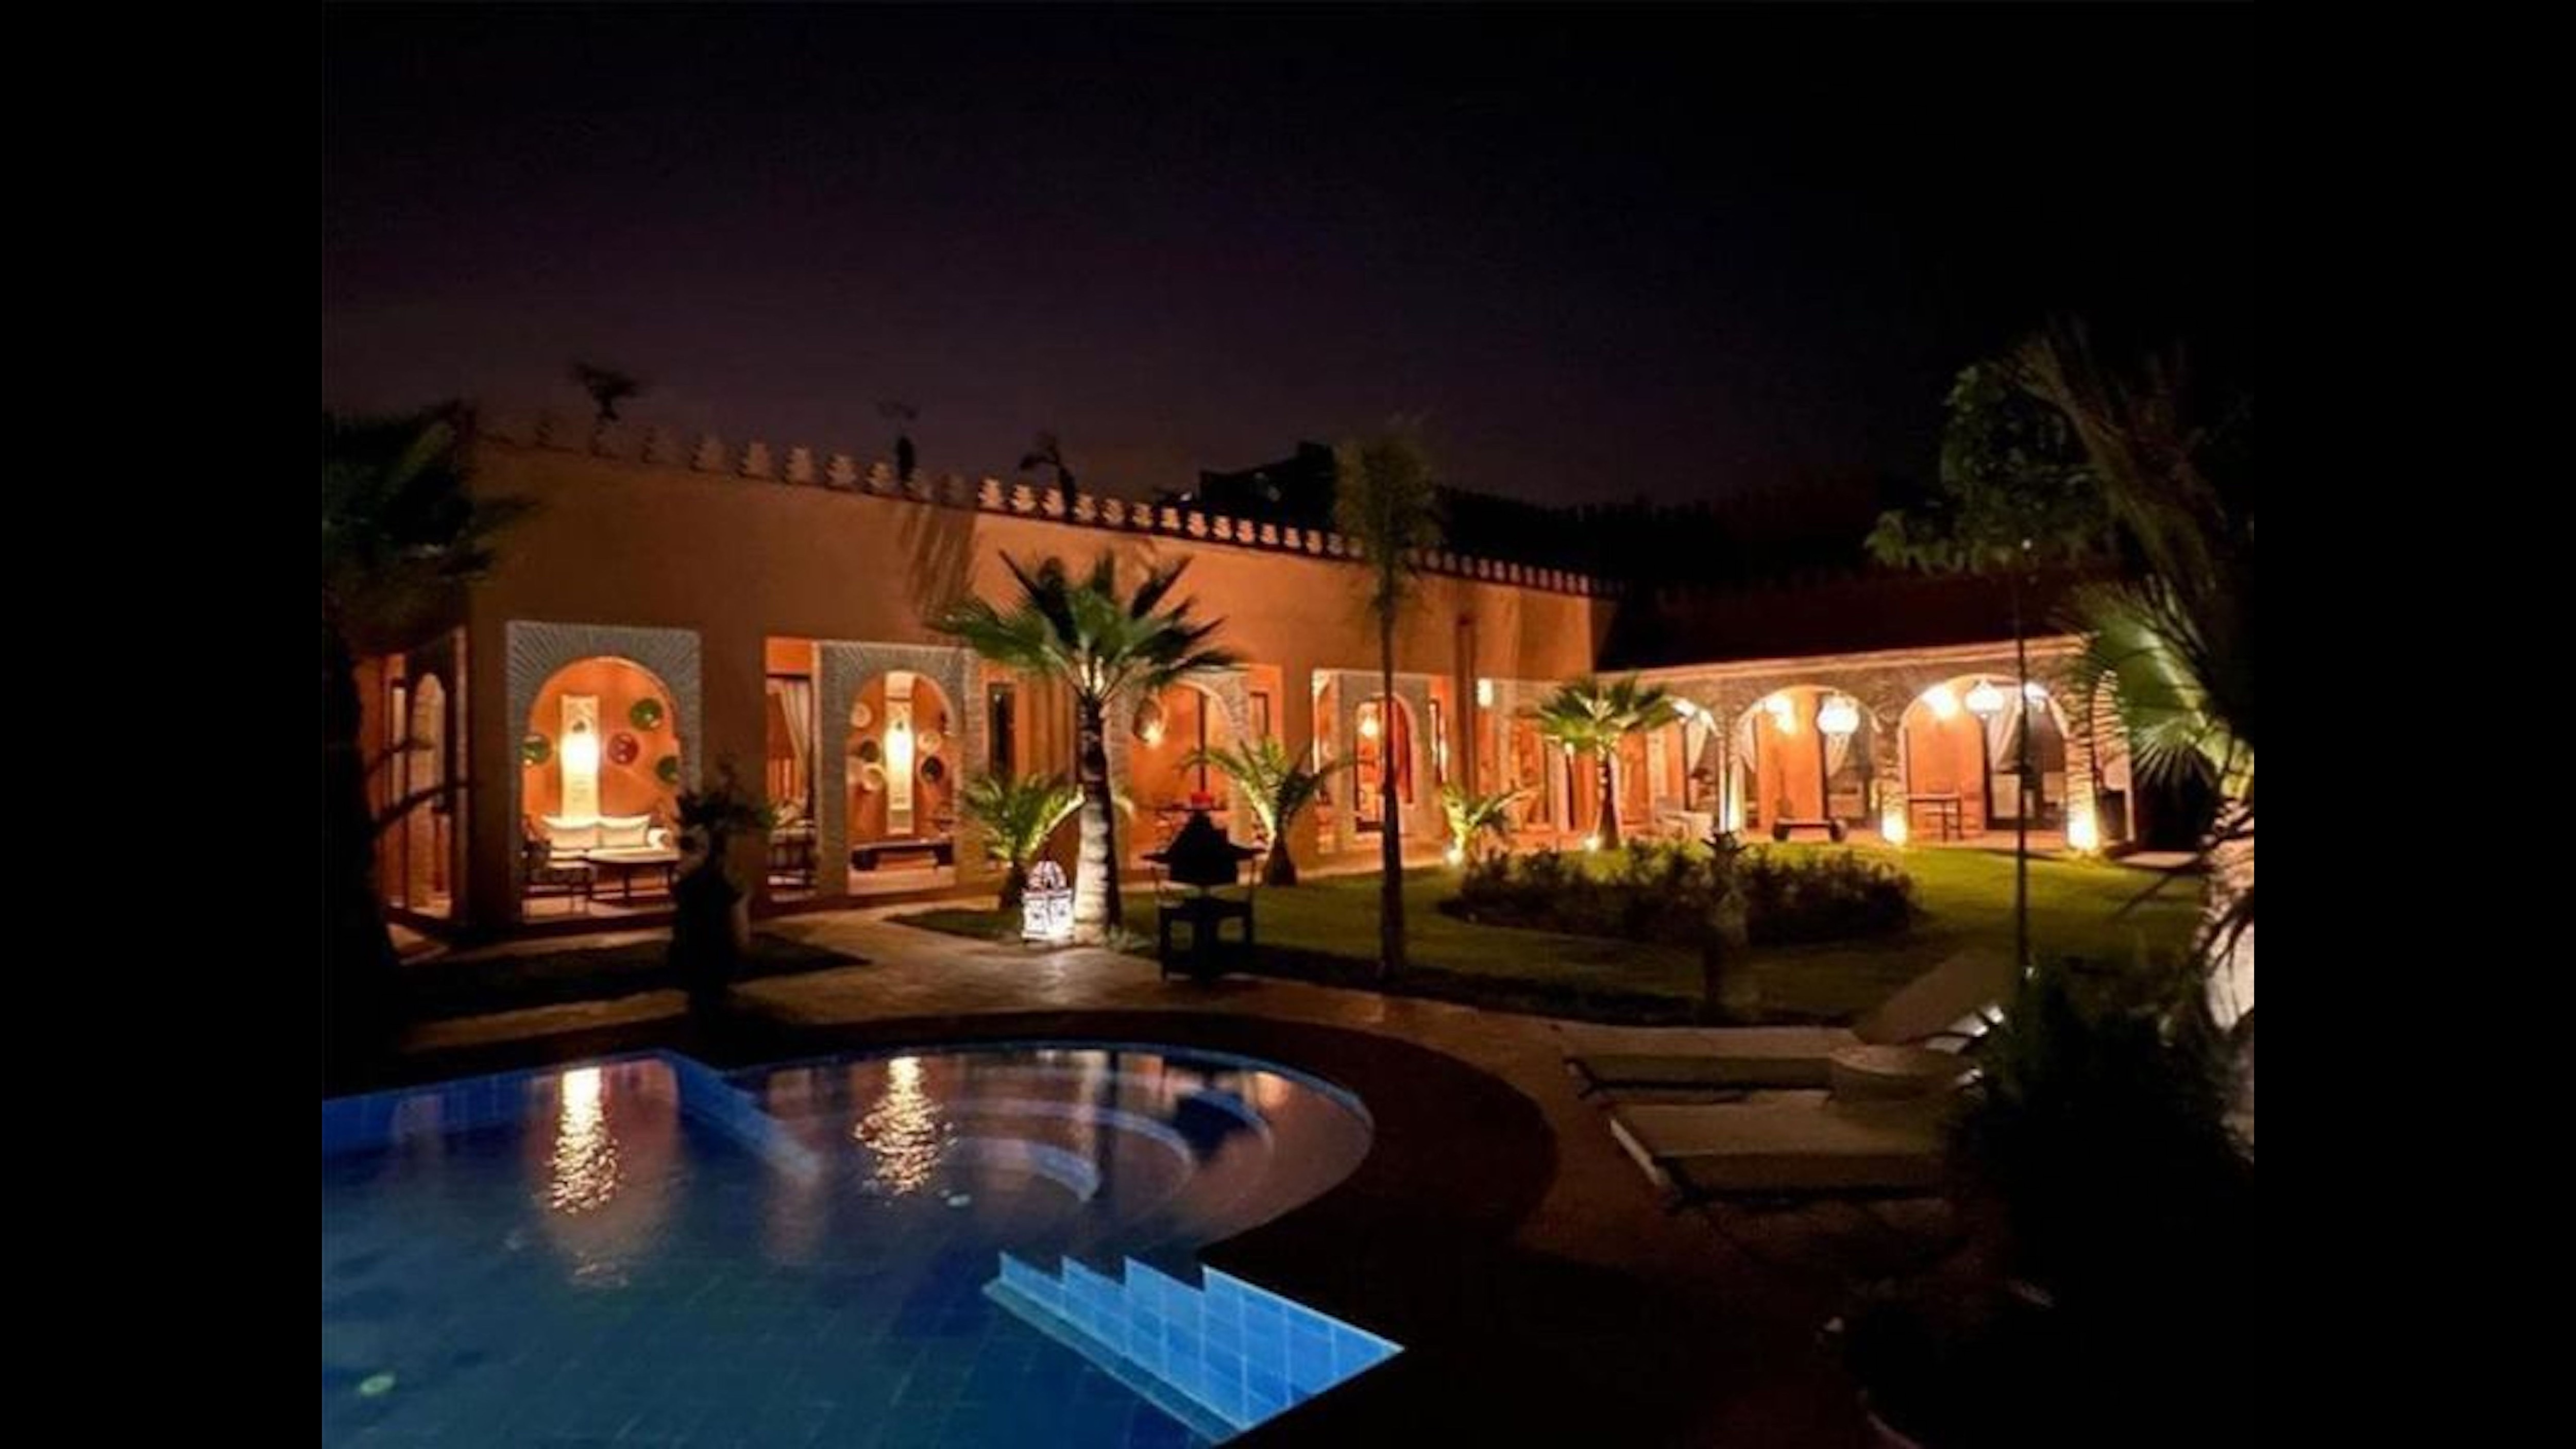 Property Image 2 - Villa with heated pool breakfast included - by feelluxuryholidays